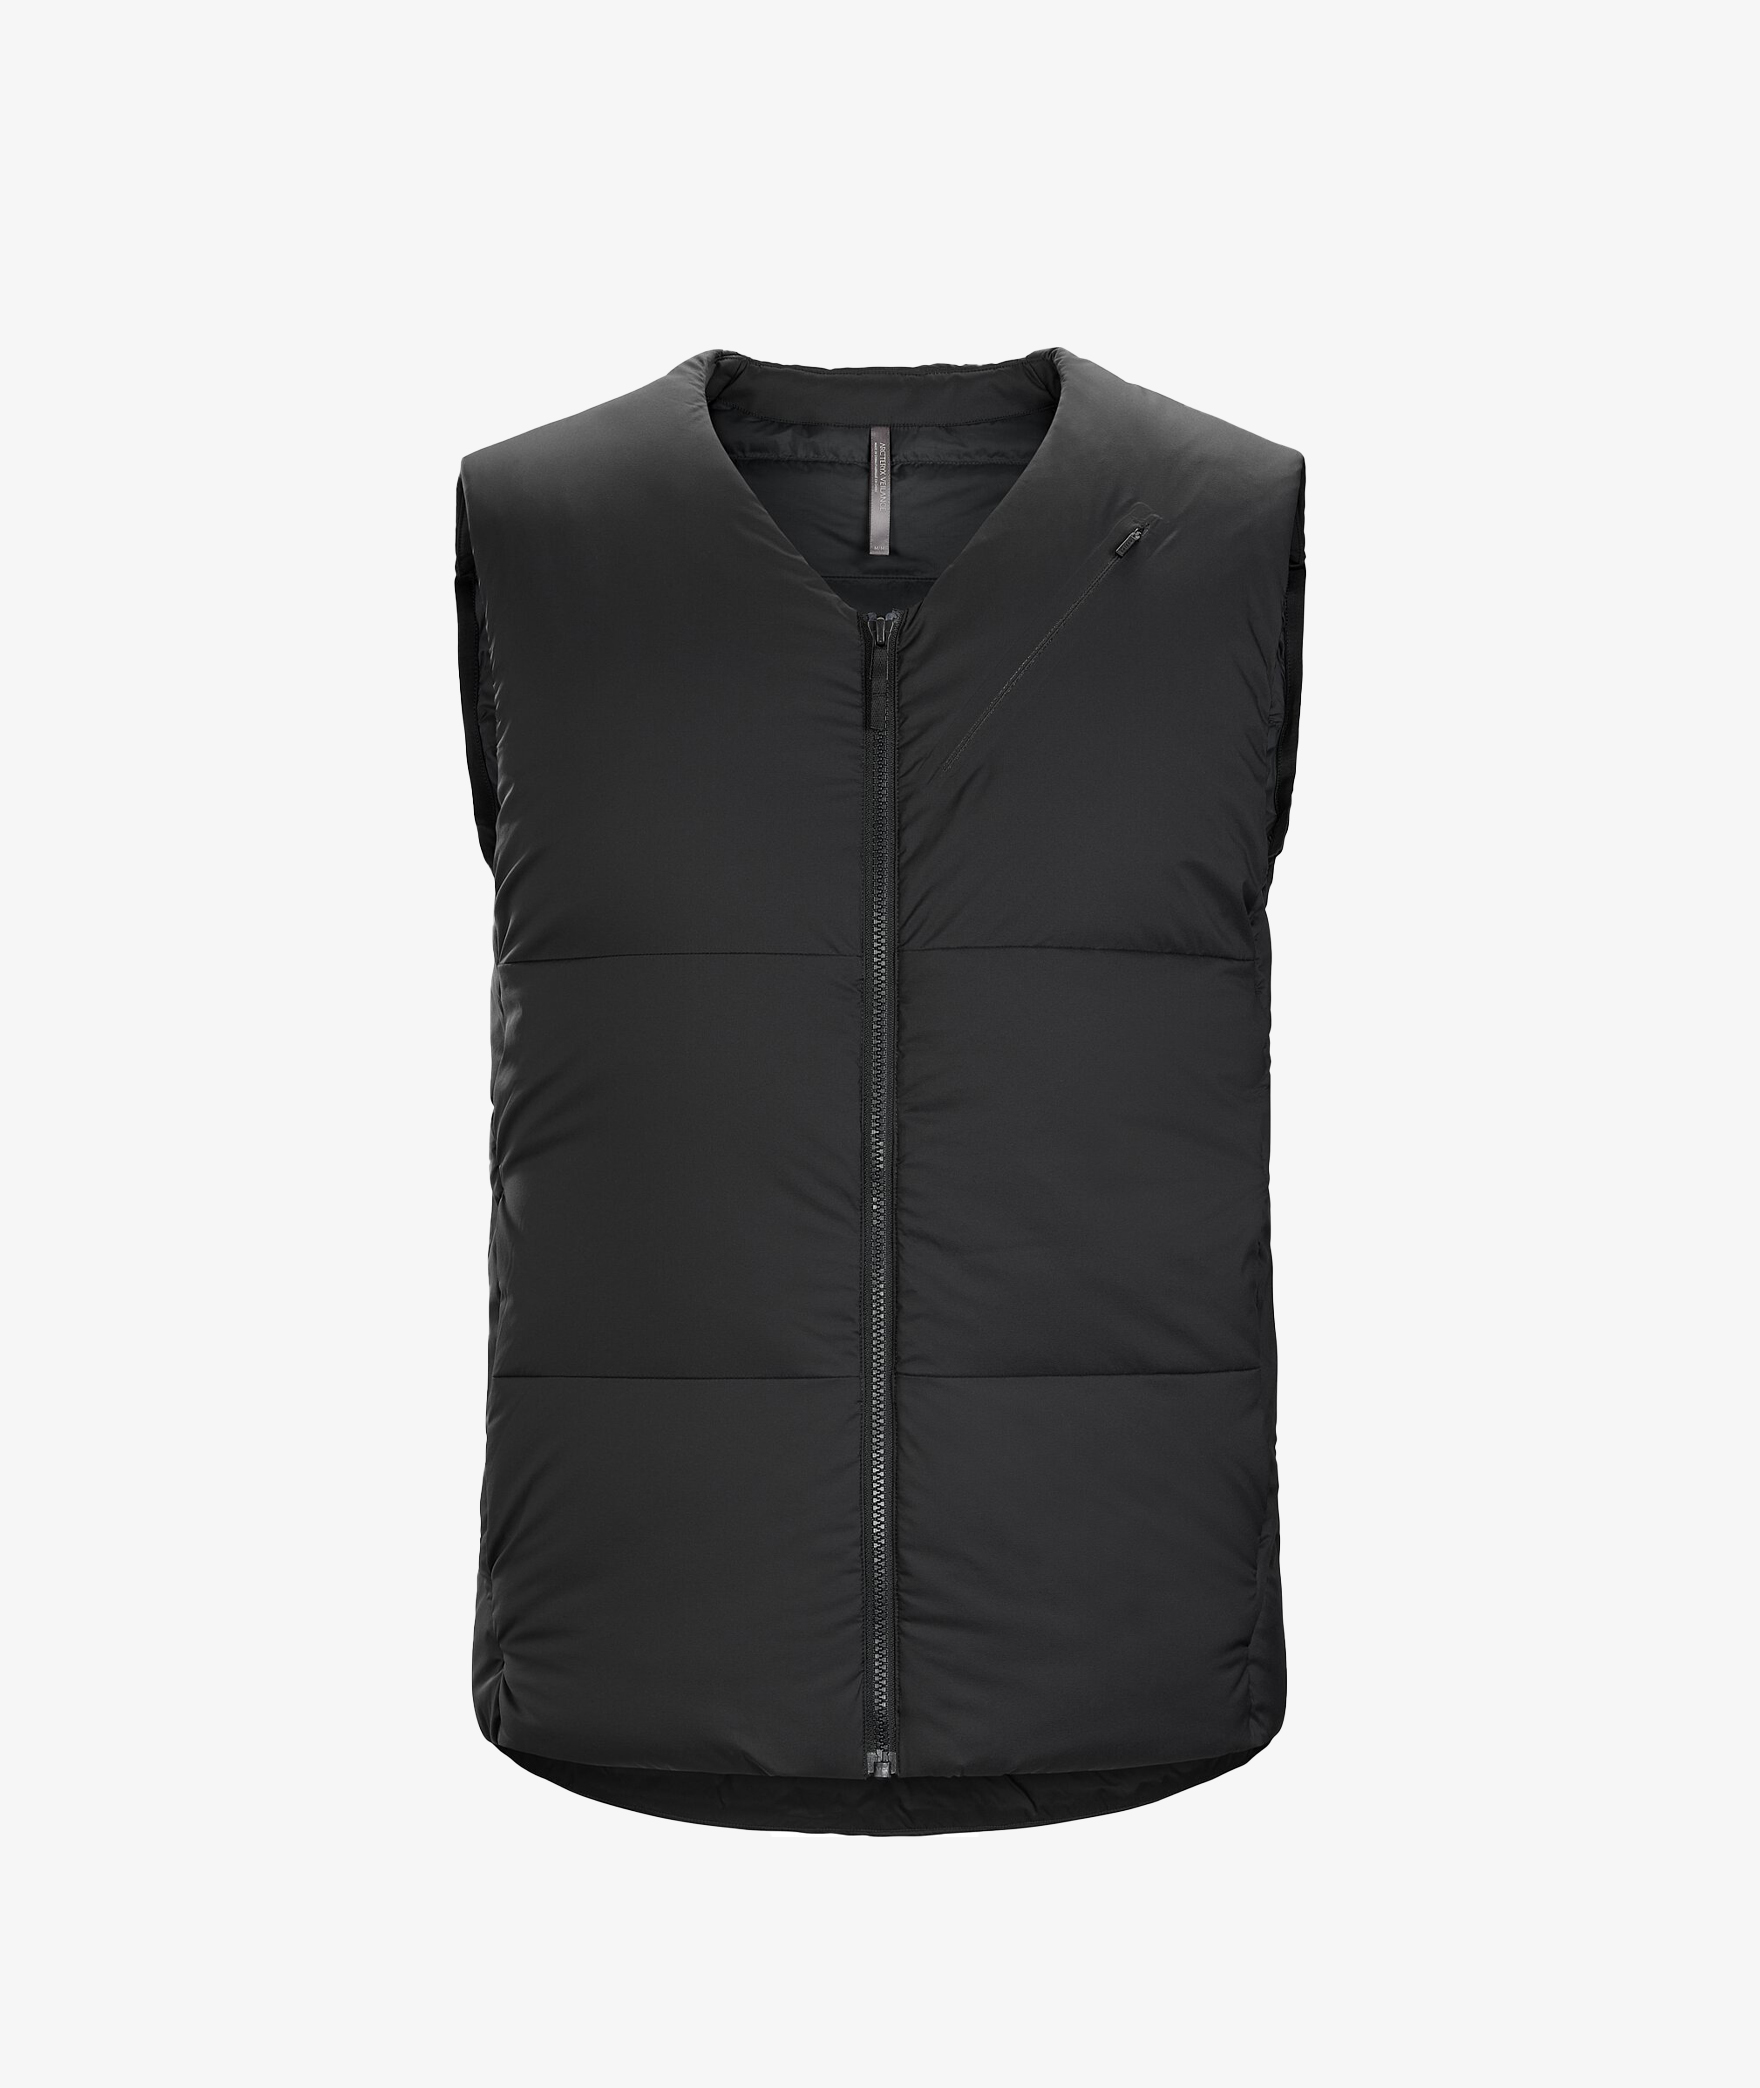 Norse Store | Shipping Worldwide - Veilance CONDUIT DOWN VEST - Black